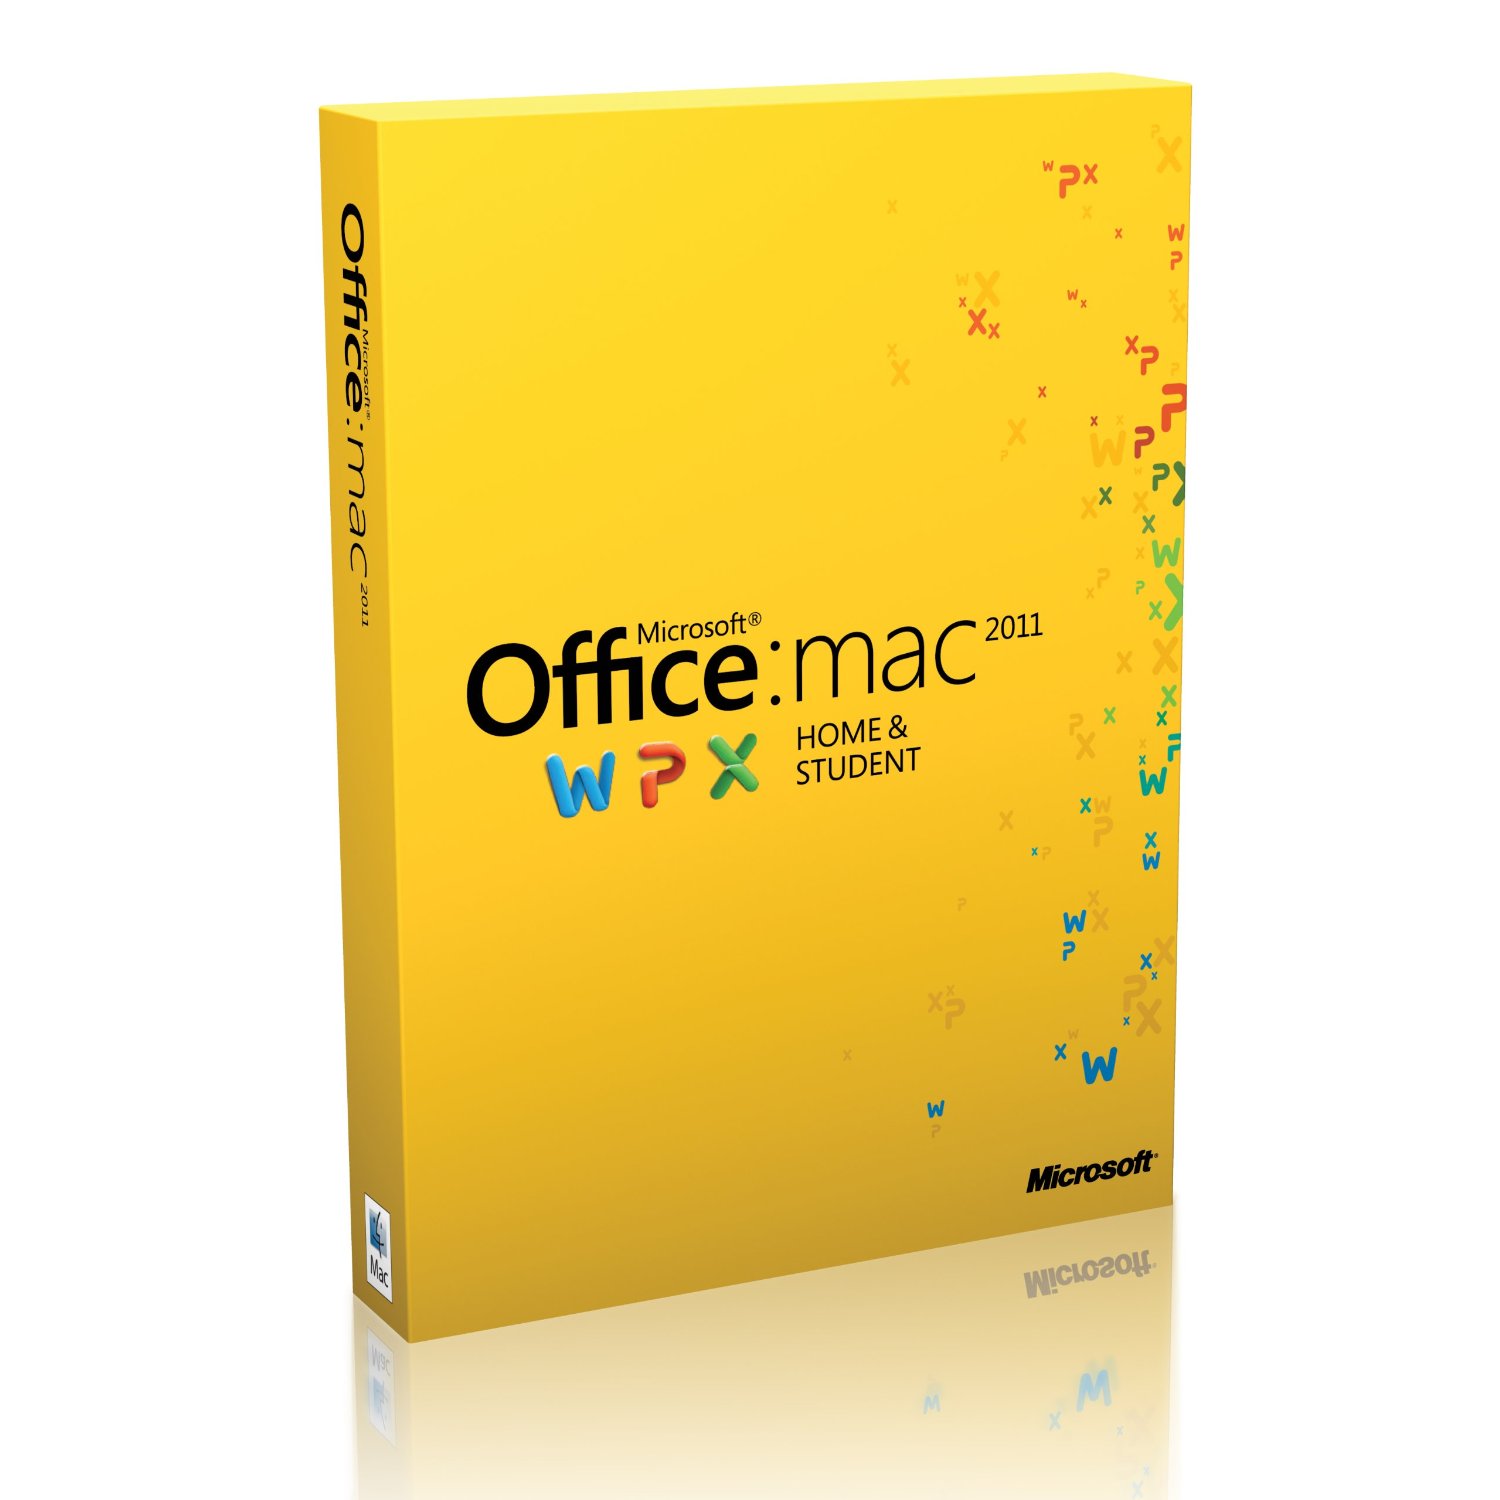 Microsoft office for mac for students